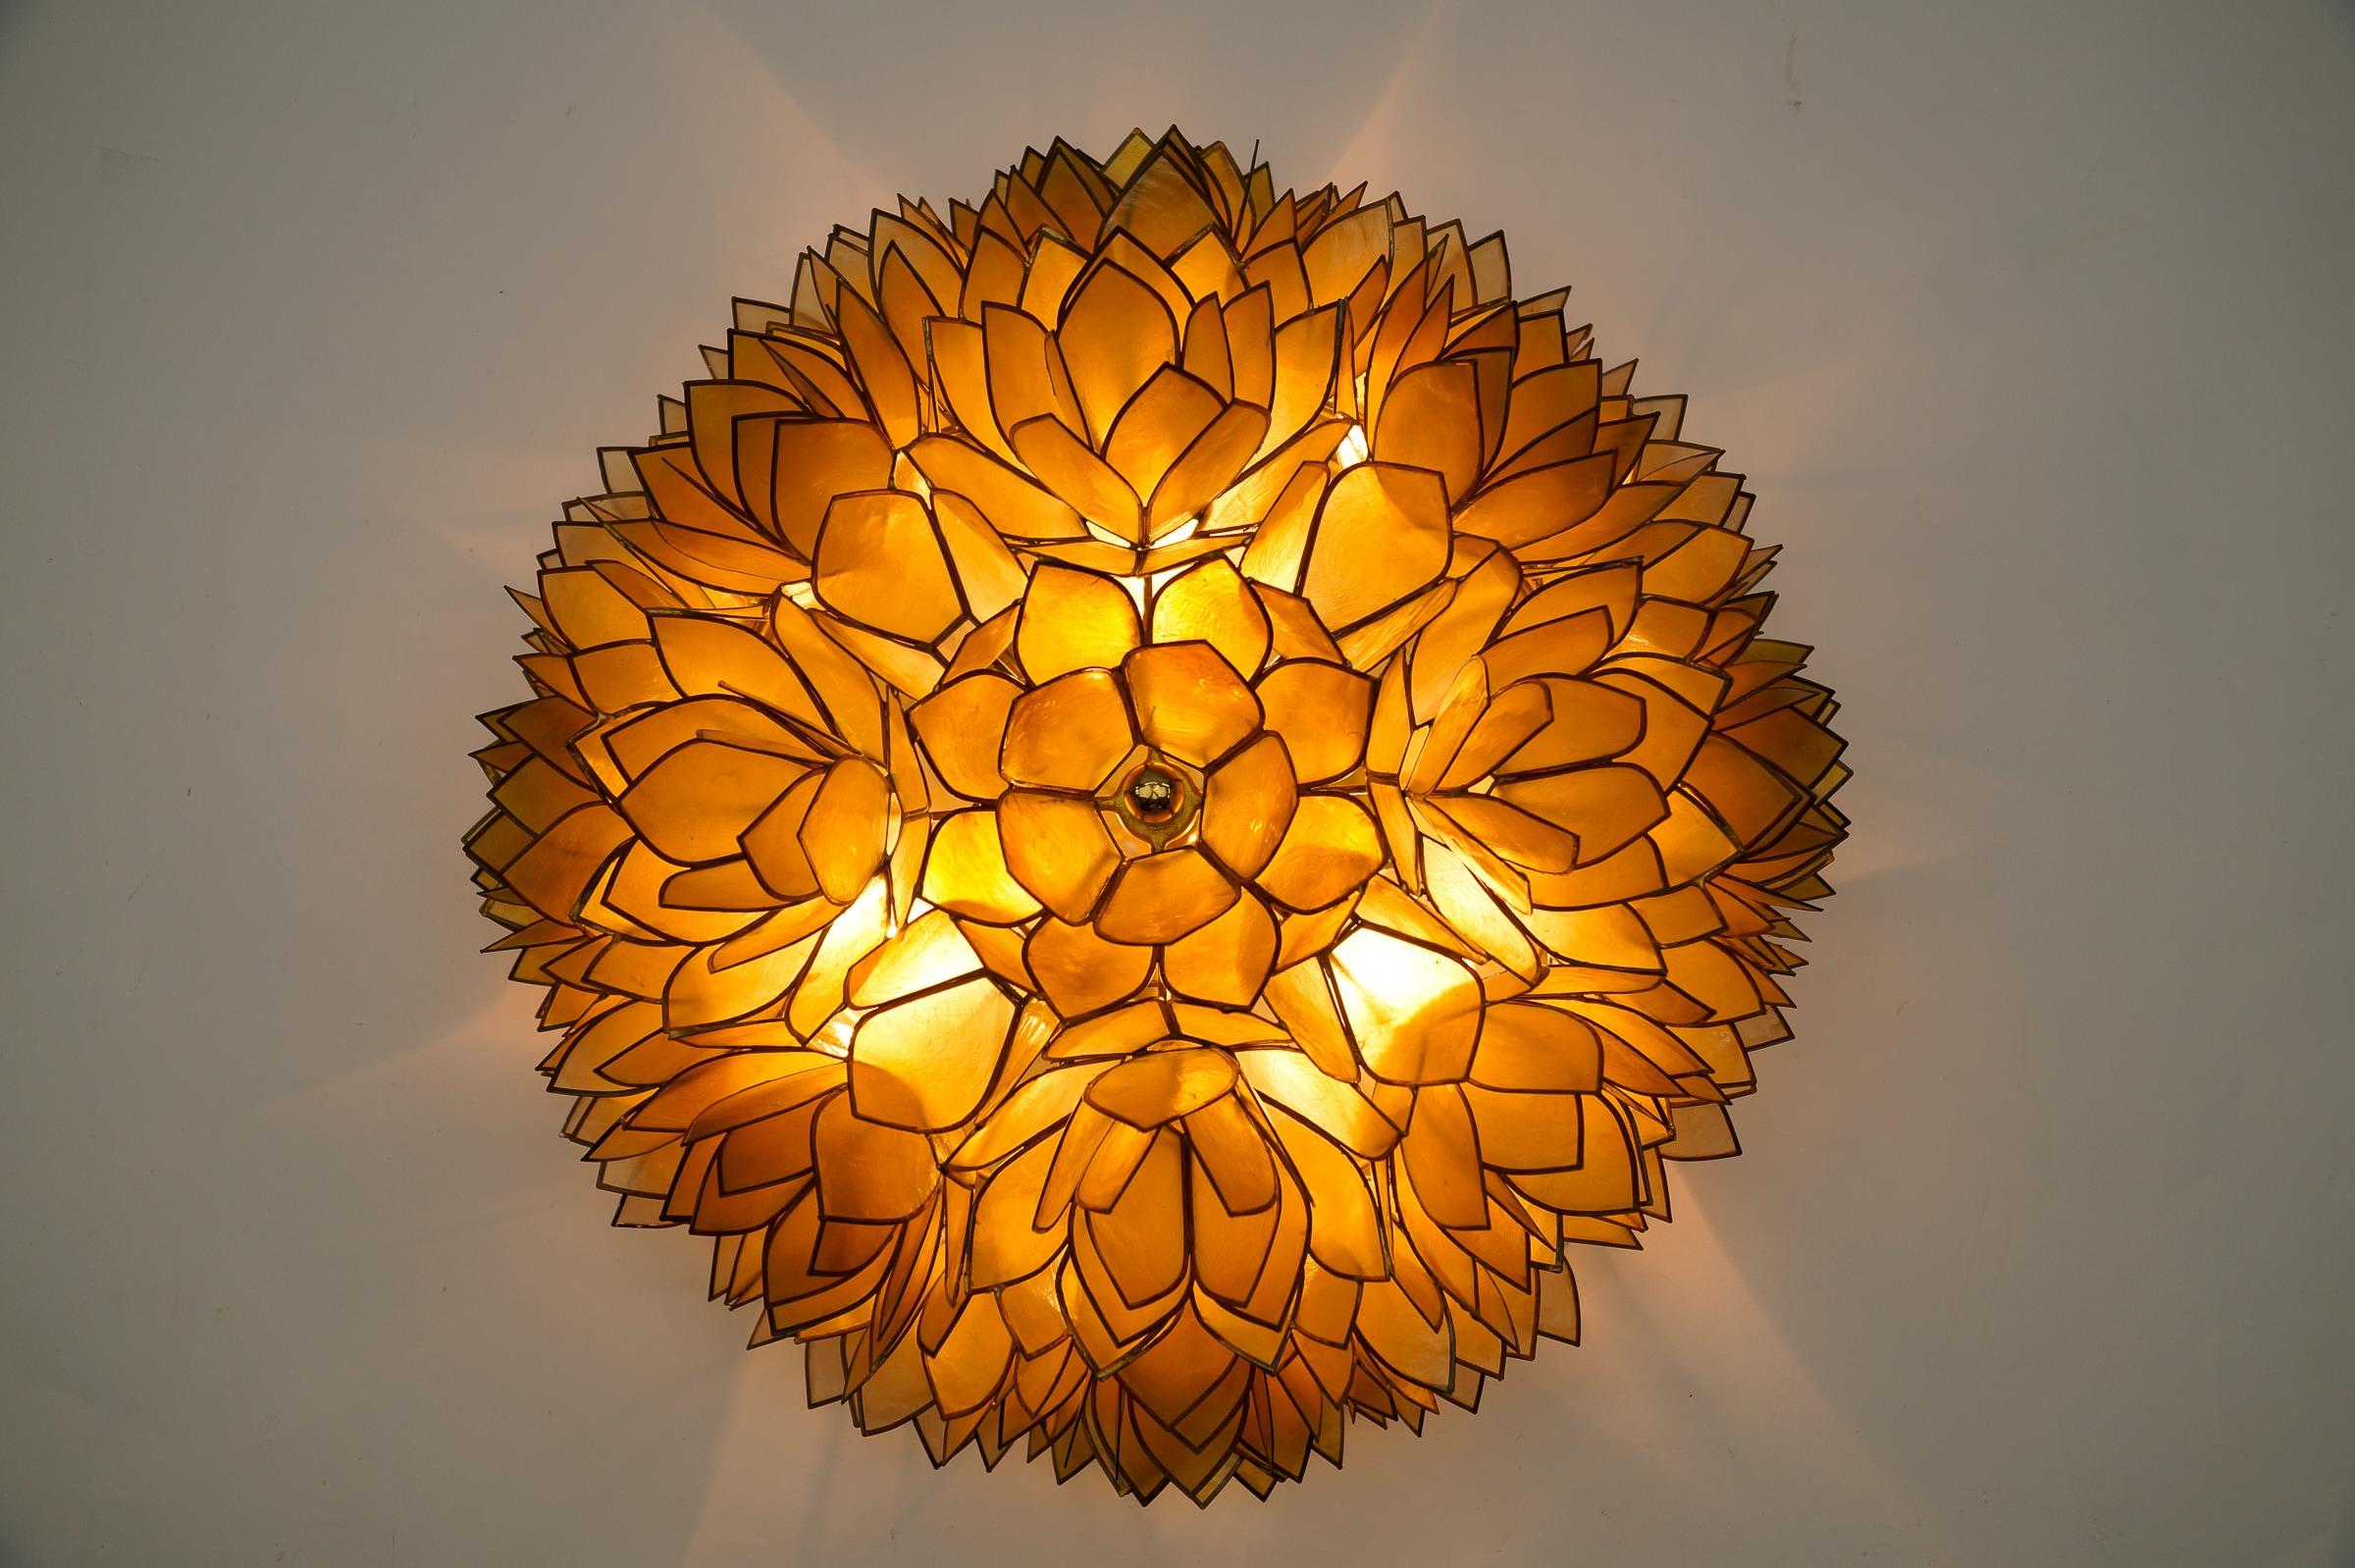 Flower Spherical Wall or Ceiling Lamps Made of Mother-of-Pearl in Yellow, 1960s For Sale 2